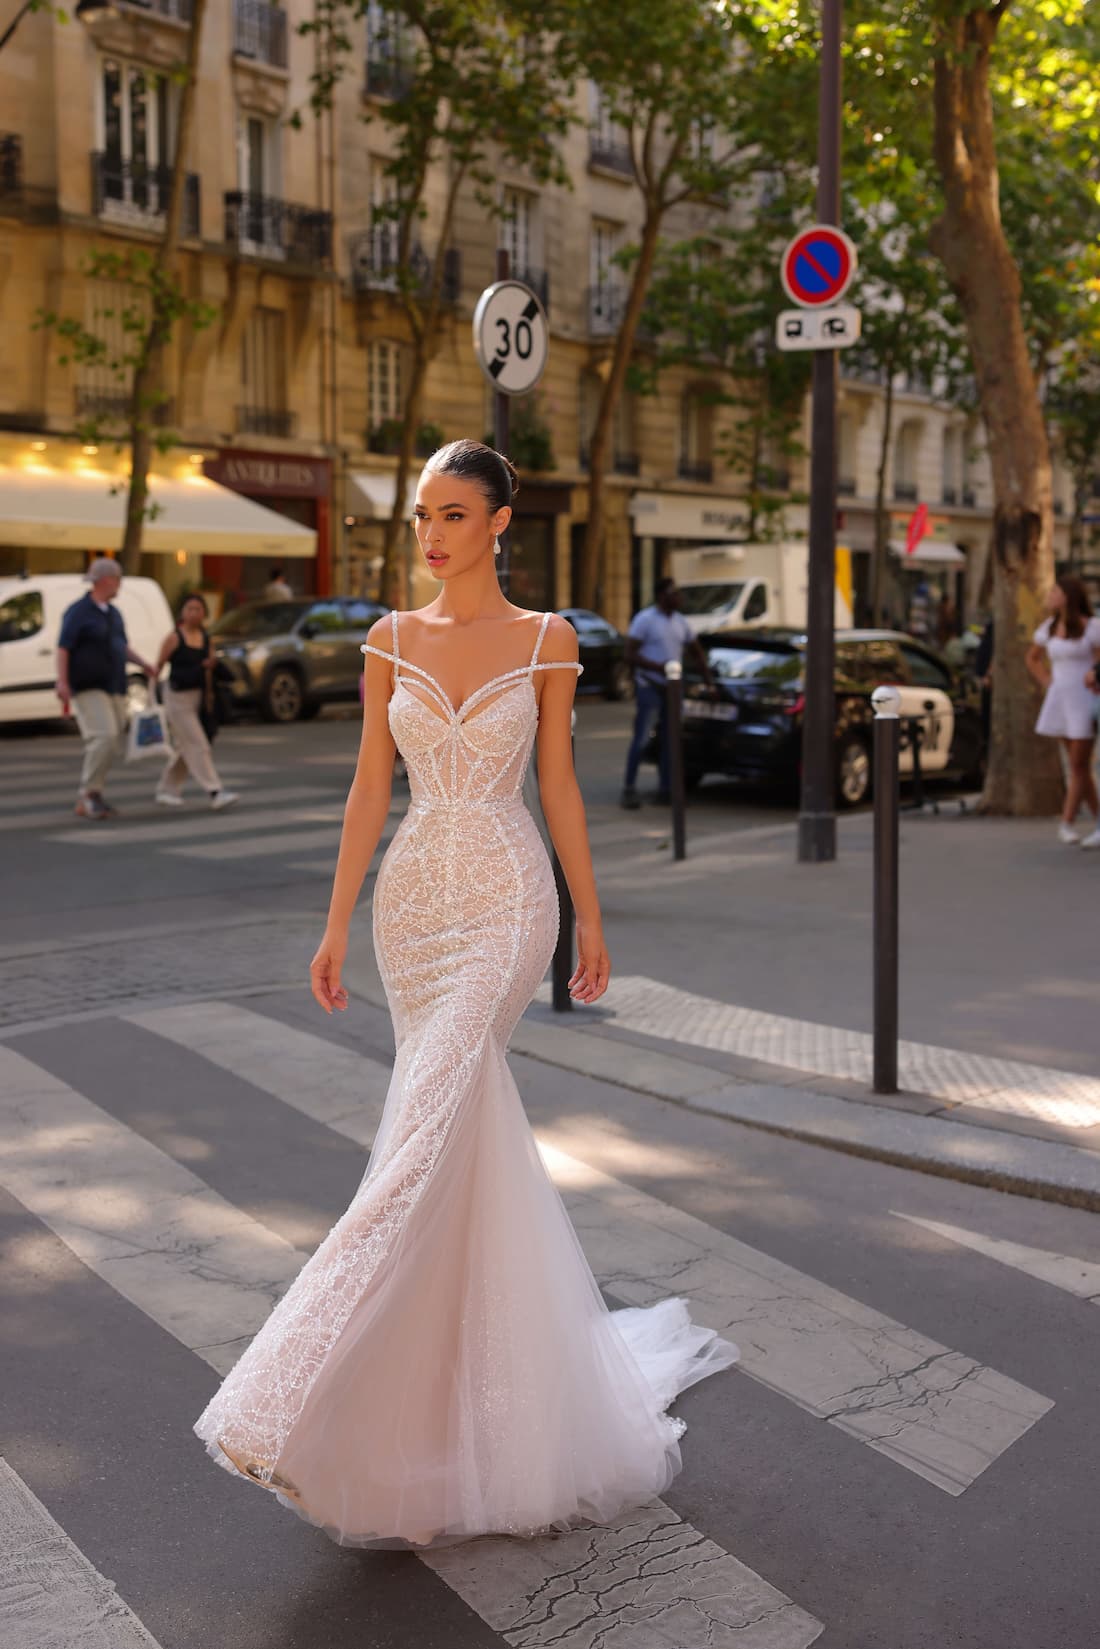 Princess Wedding Dresses in Auckland - Dell'Amore Bridal